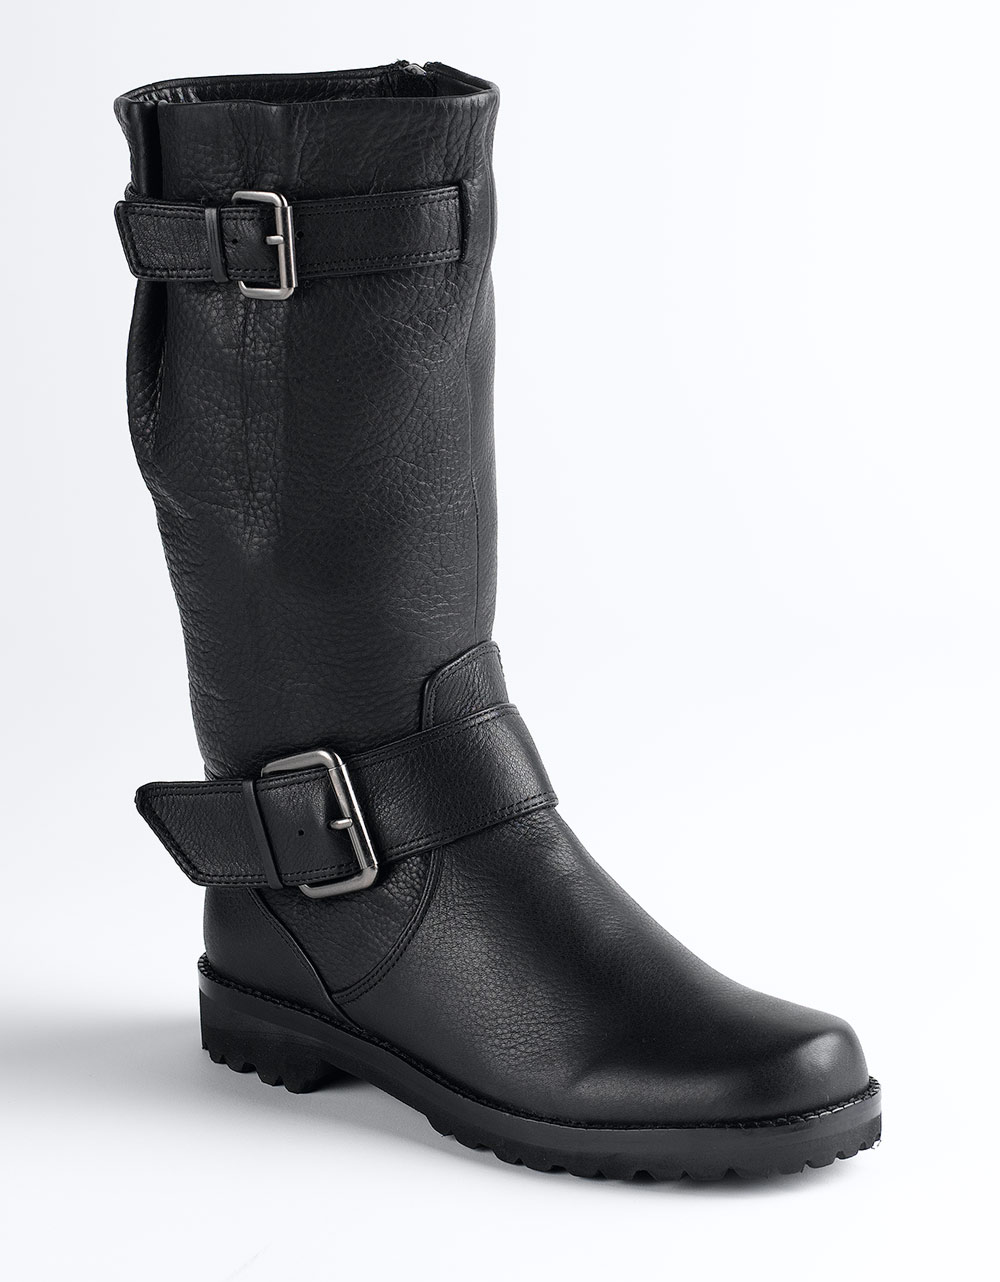 Lyst - Gentle Souls Buckled Up Boots in Black